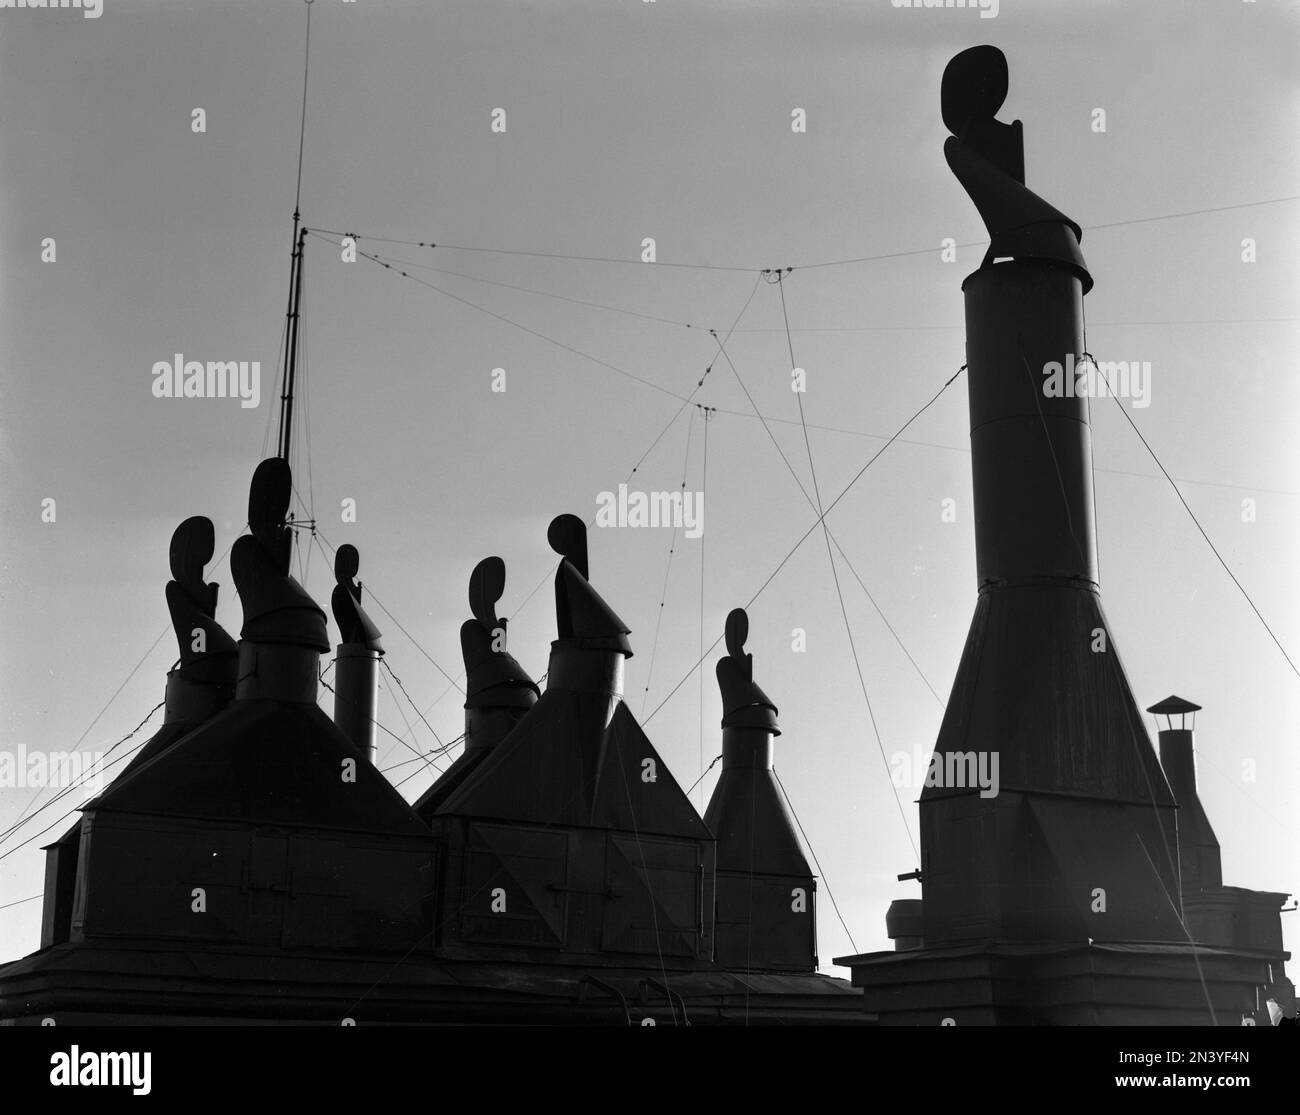 In the 1950s. Detail of chimneys on a rooftop in Stockholm Sweden. The shape and form of the metallic chimneys against the sky is graphical. Sweden 1953 Kristoffersson ref 60K-20 Stock Photo